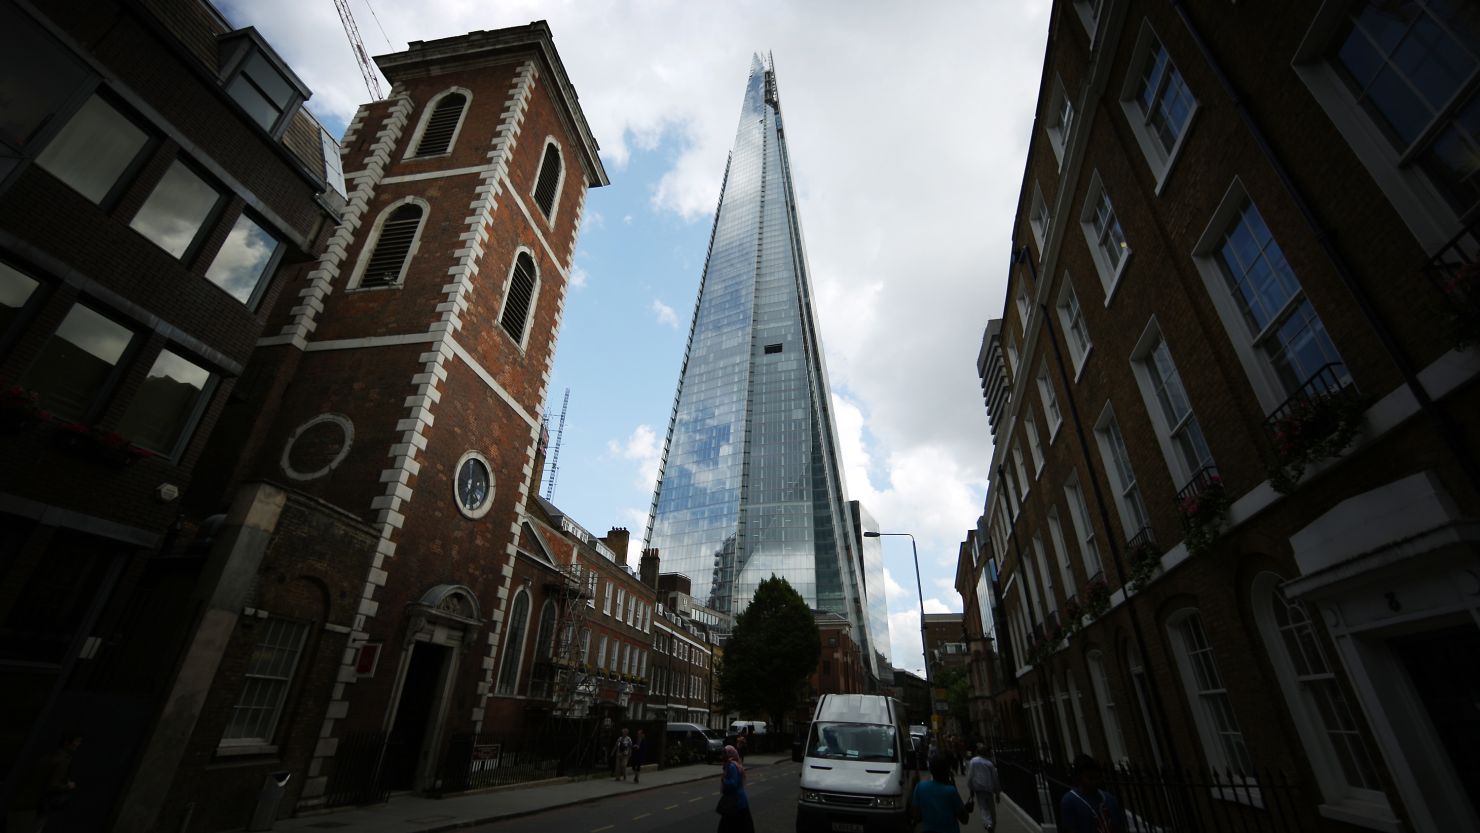 At 1,017 feet, the Shard is the tallest building in the European Union.